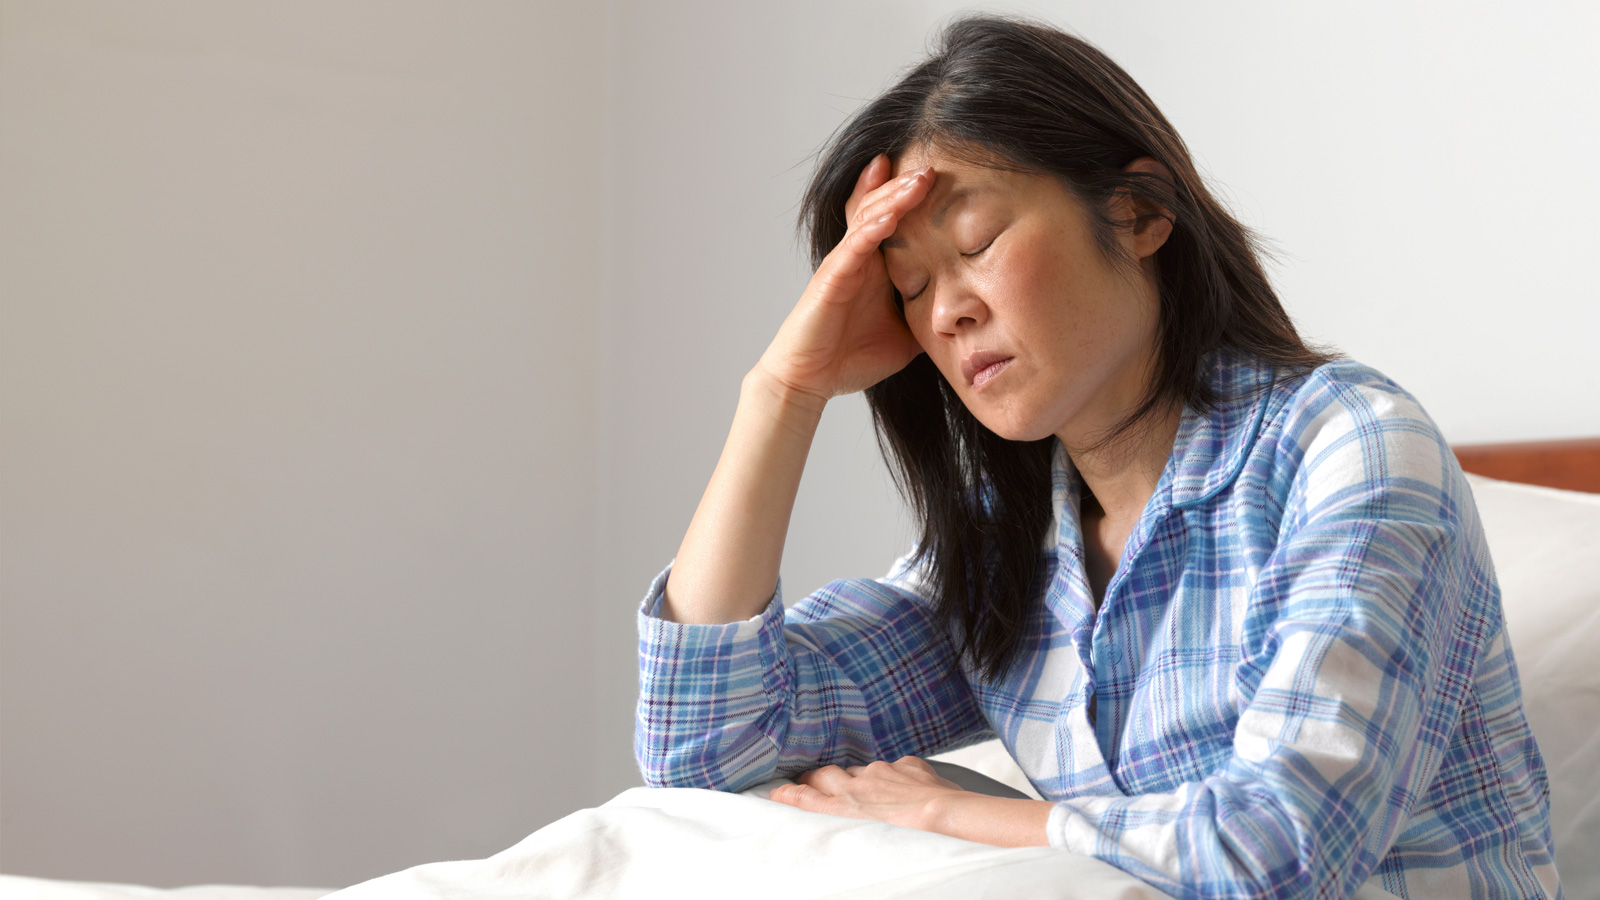 The Science Behind Migraines and Headaches